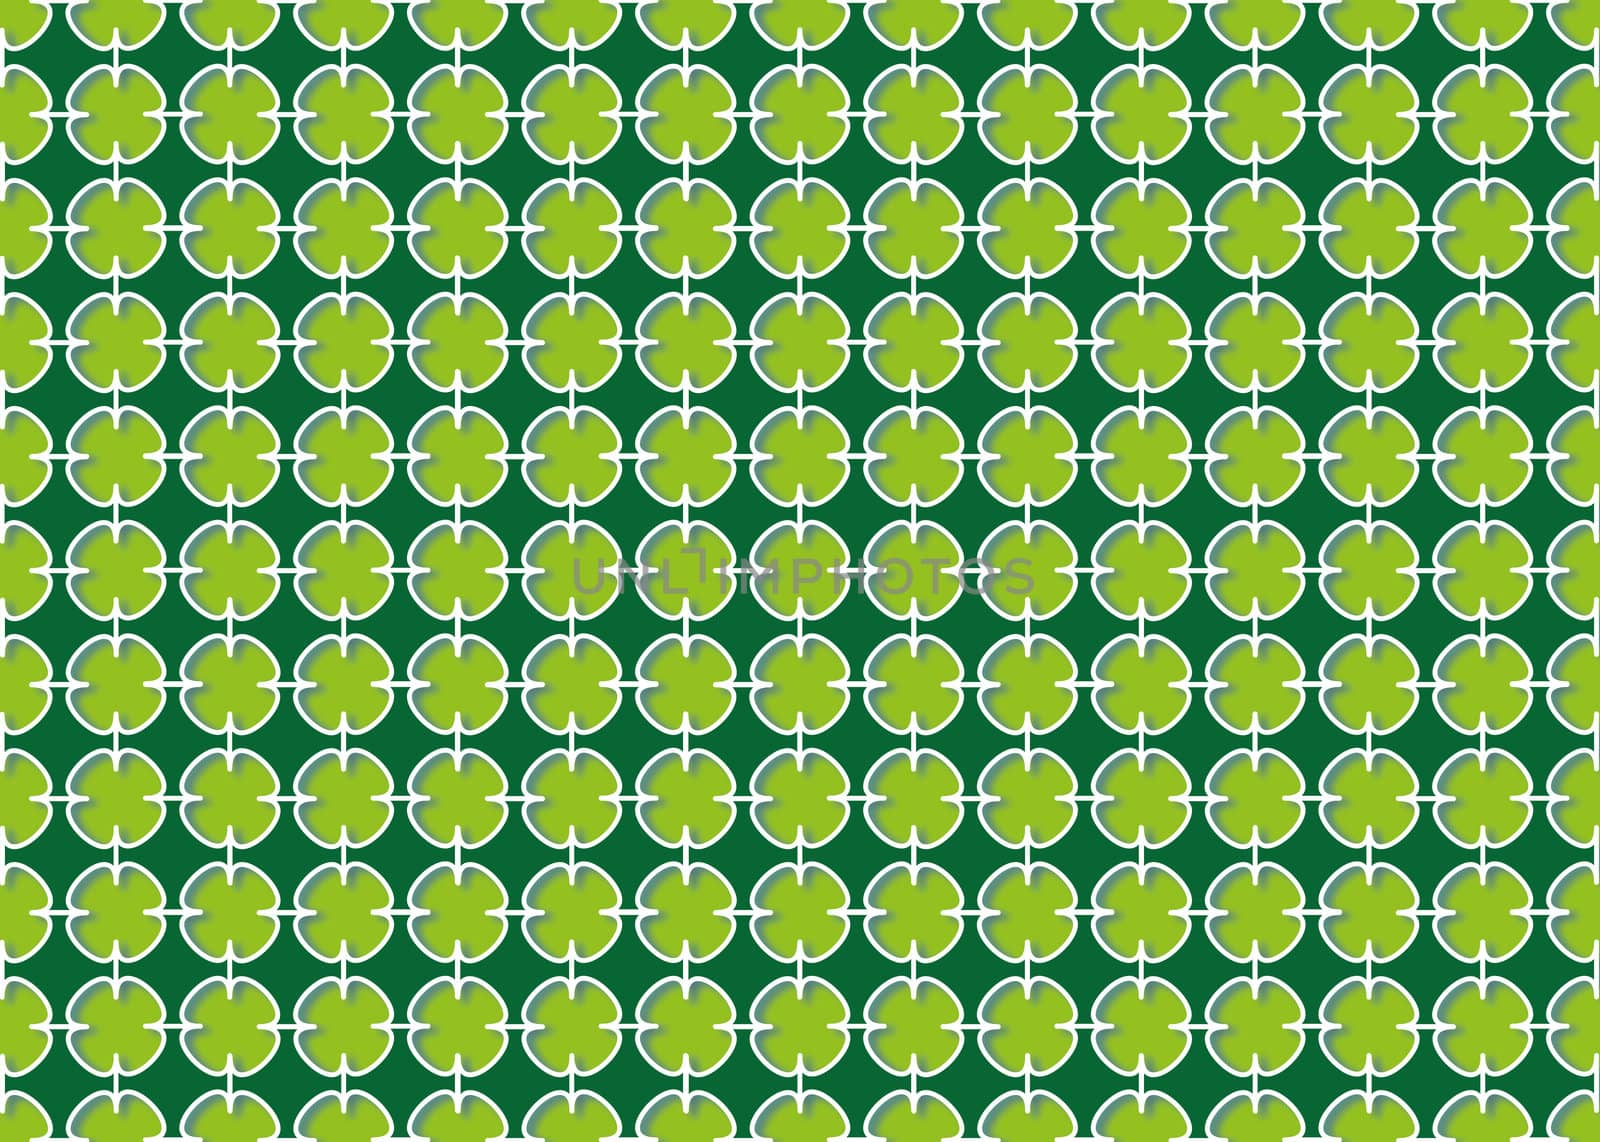 abstract background of green crosses interconnected to mesh